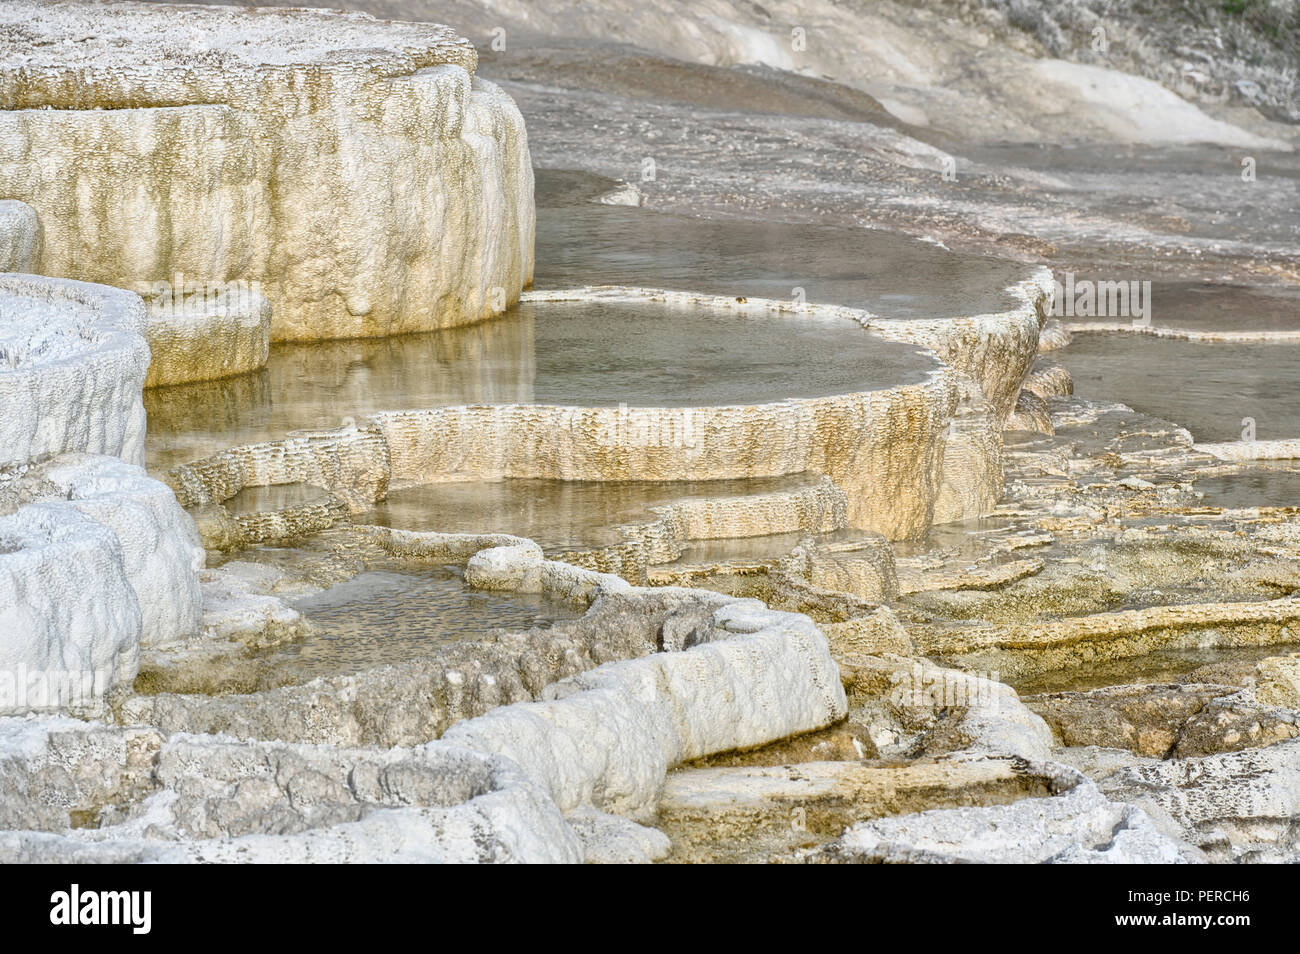 Mineral deposit terraces, Mammoth Hot Springs, Yellowstone National Park, Wyoming, USA Stock Photo